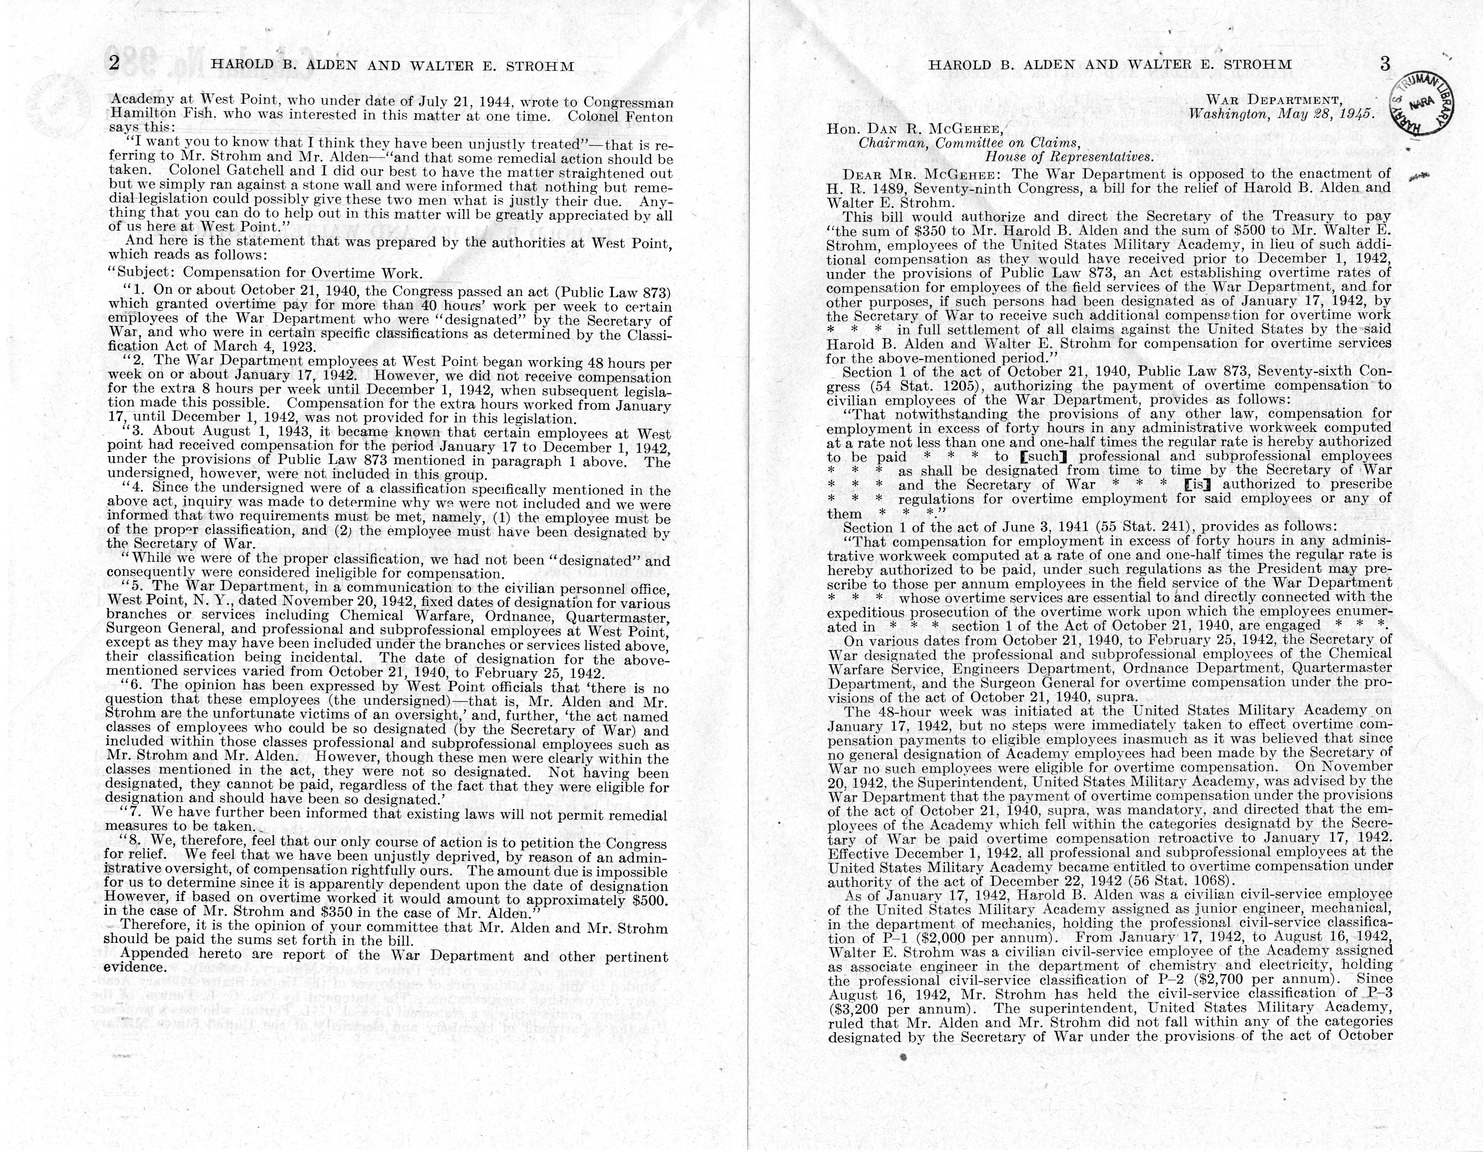 Memorandum from Harold D. Smith to M. C. Latta, H. R. 1489, For the Relief of Harold B. Alden and Walter E. Strohm, with Attachments